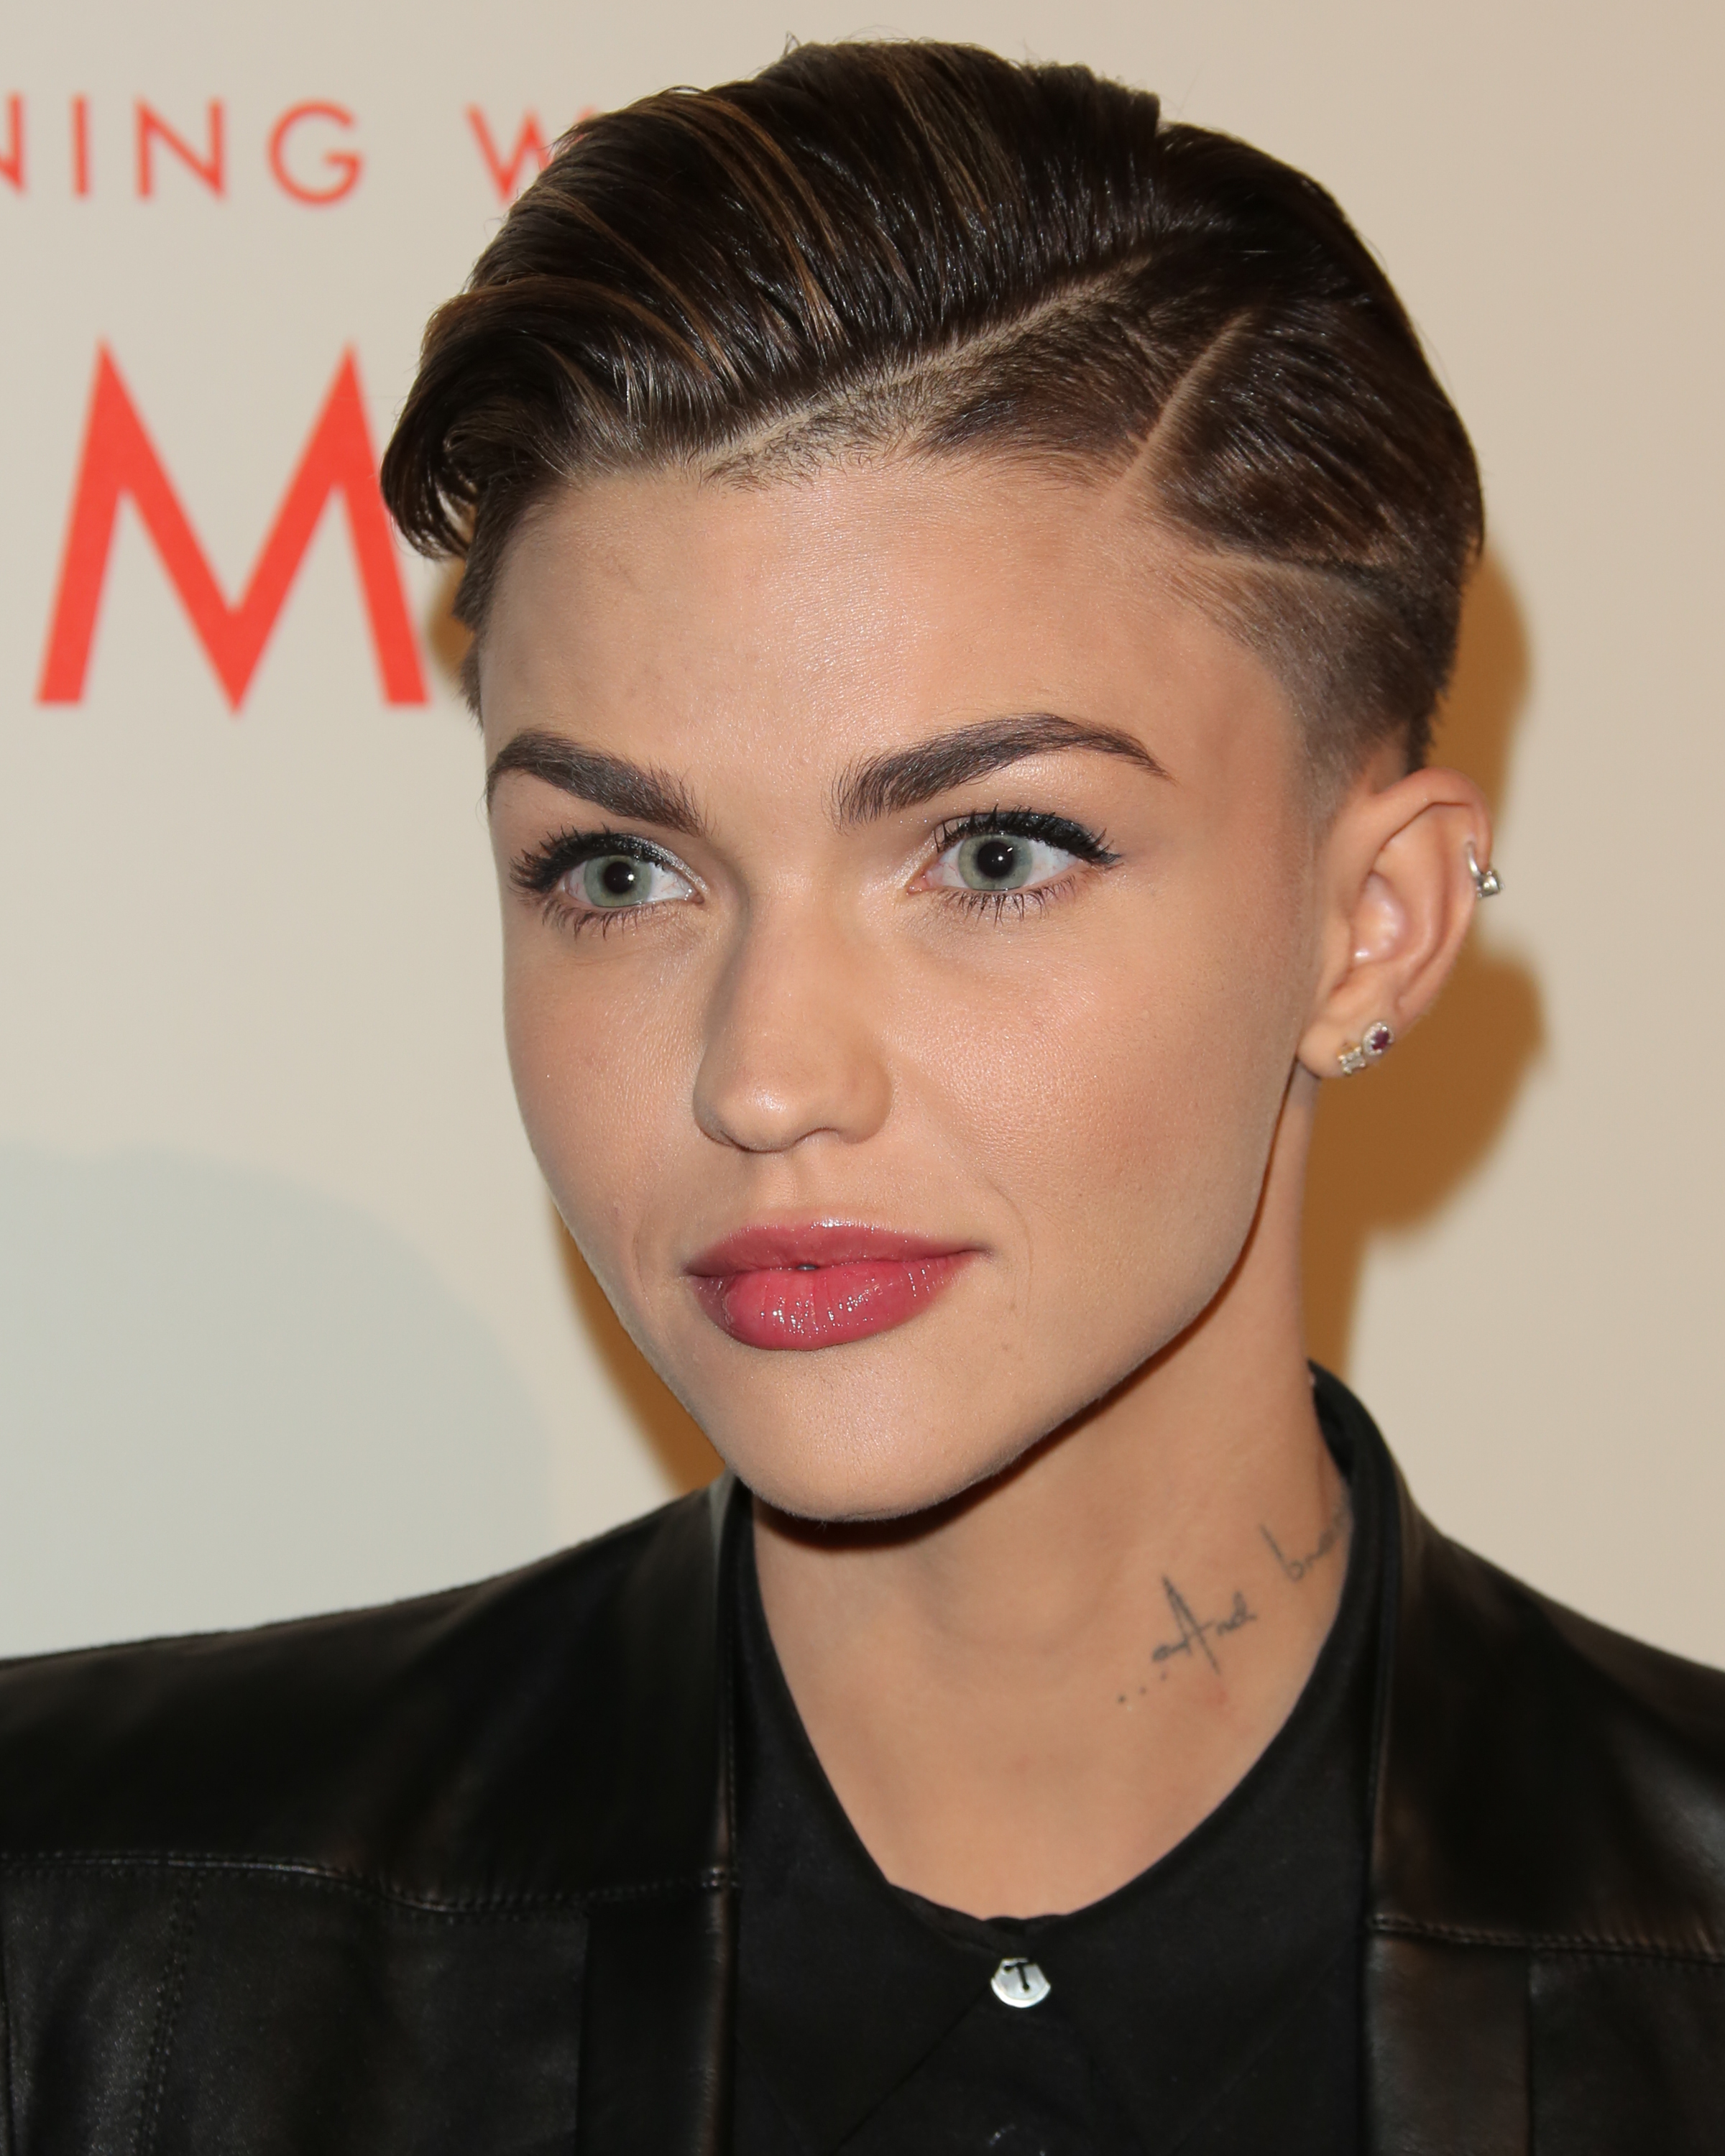 TV Personality / DJ Ruby Rose attends the L.A. Gay &amp; Lesbian Center's 2014 An Evening With Women at The Beverly Hilton Hotel (Paul Archuleta&amp;mdash;FilmMagic)